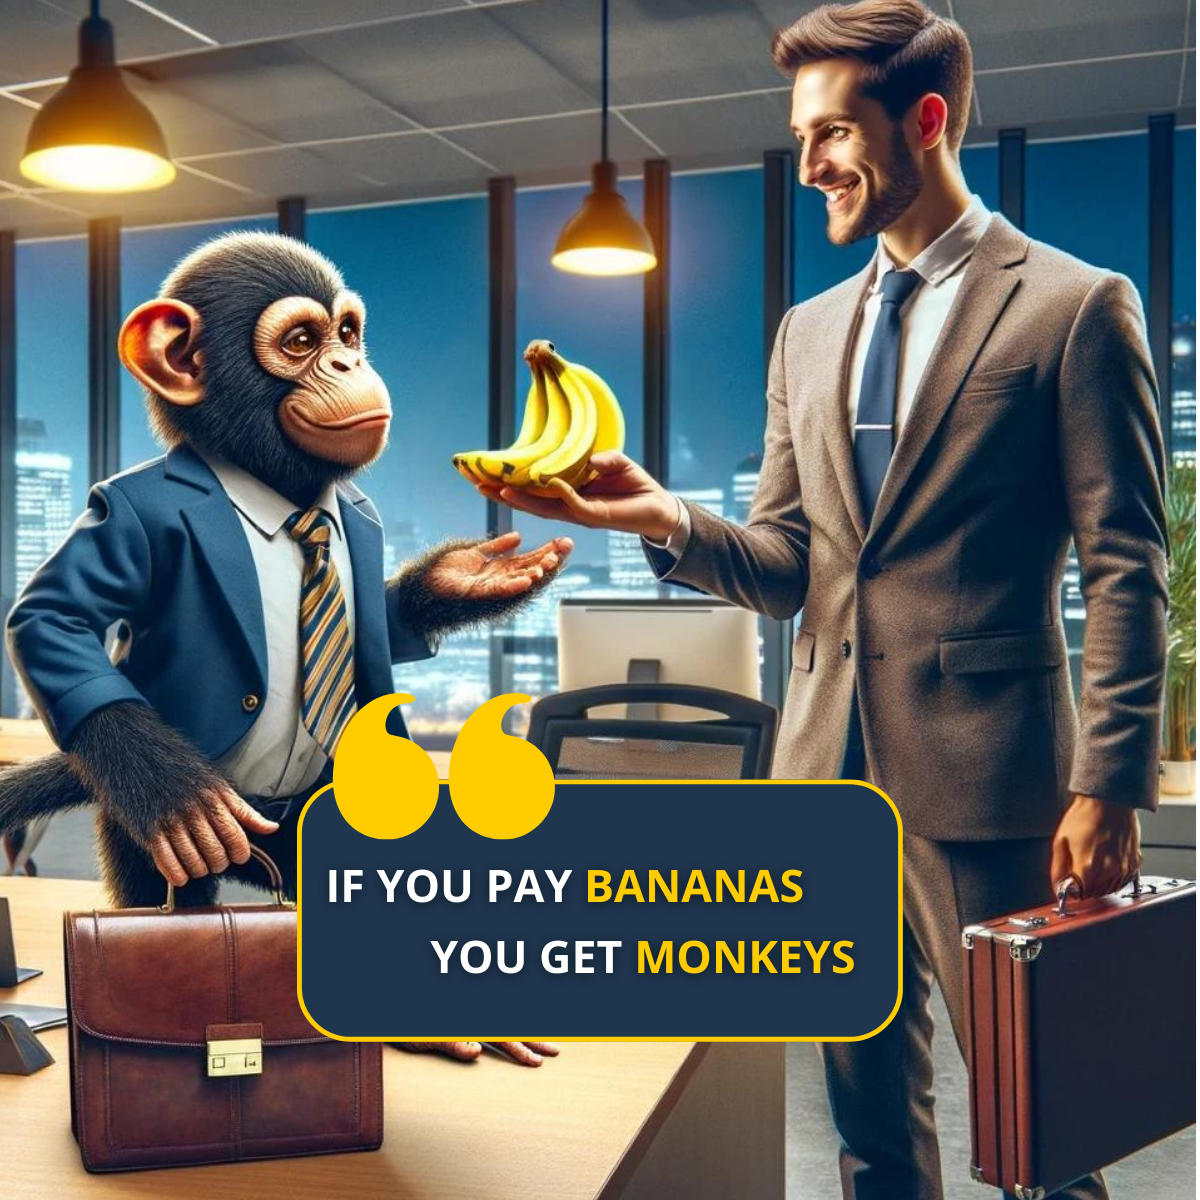 If you pay bananas, you get monkeys!